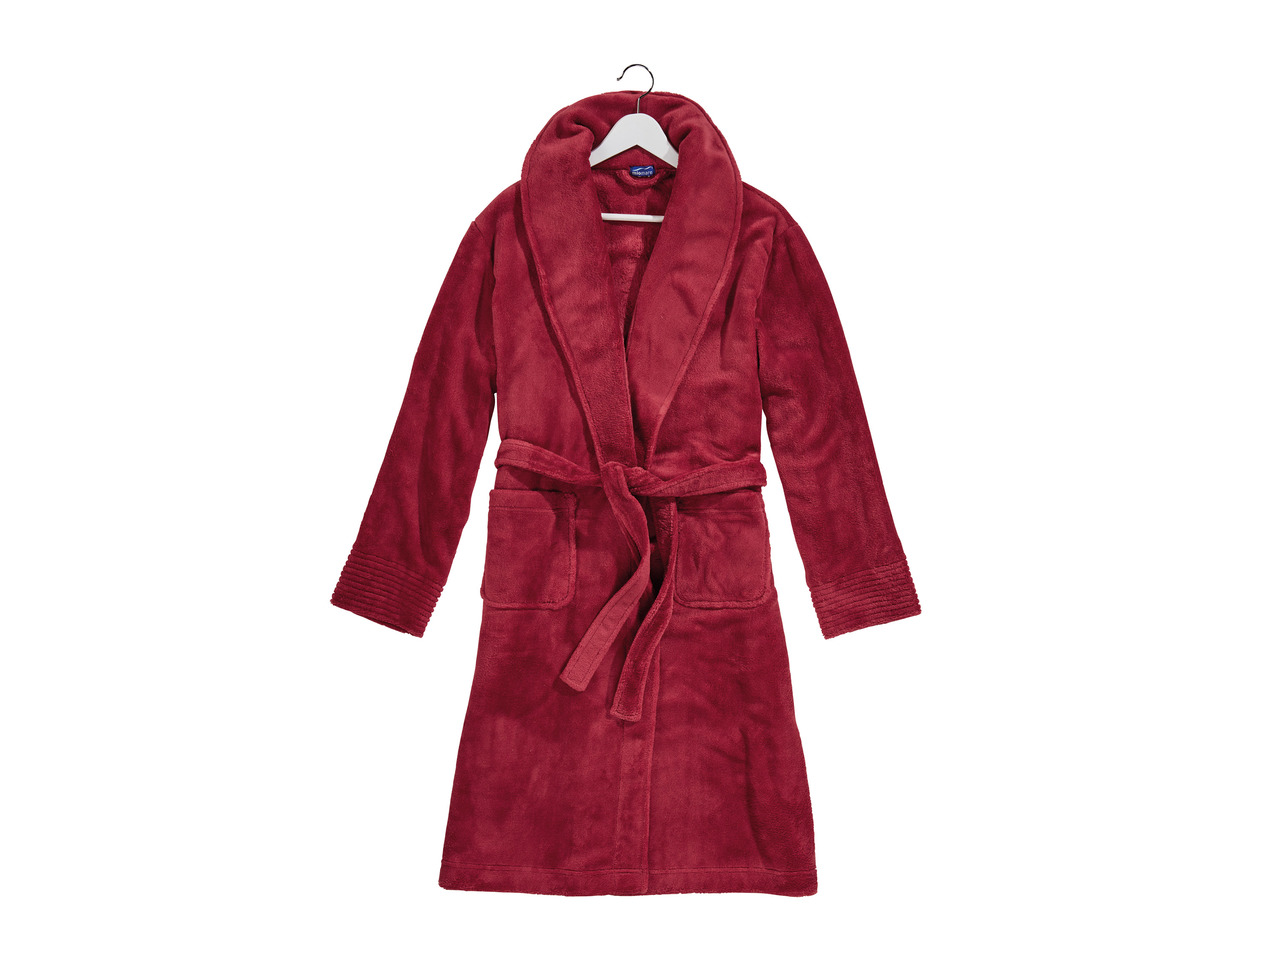 Miomare Adults' Microfibre Dressing Gown1